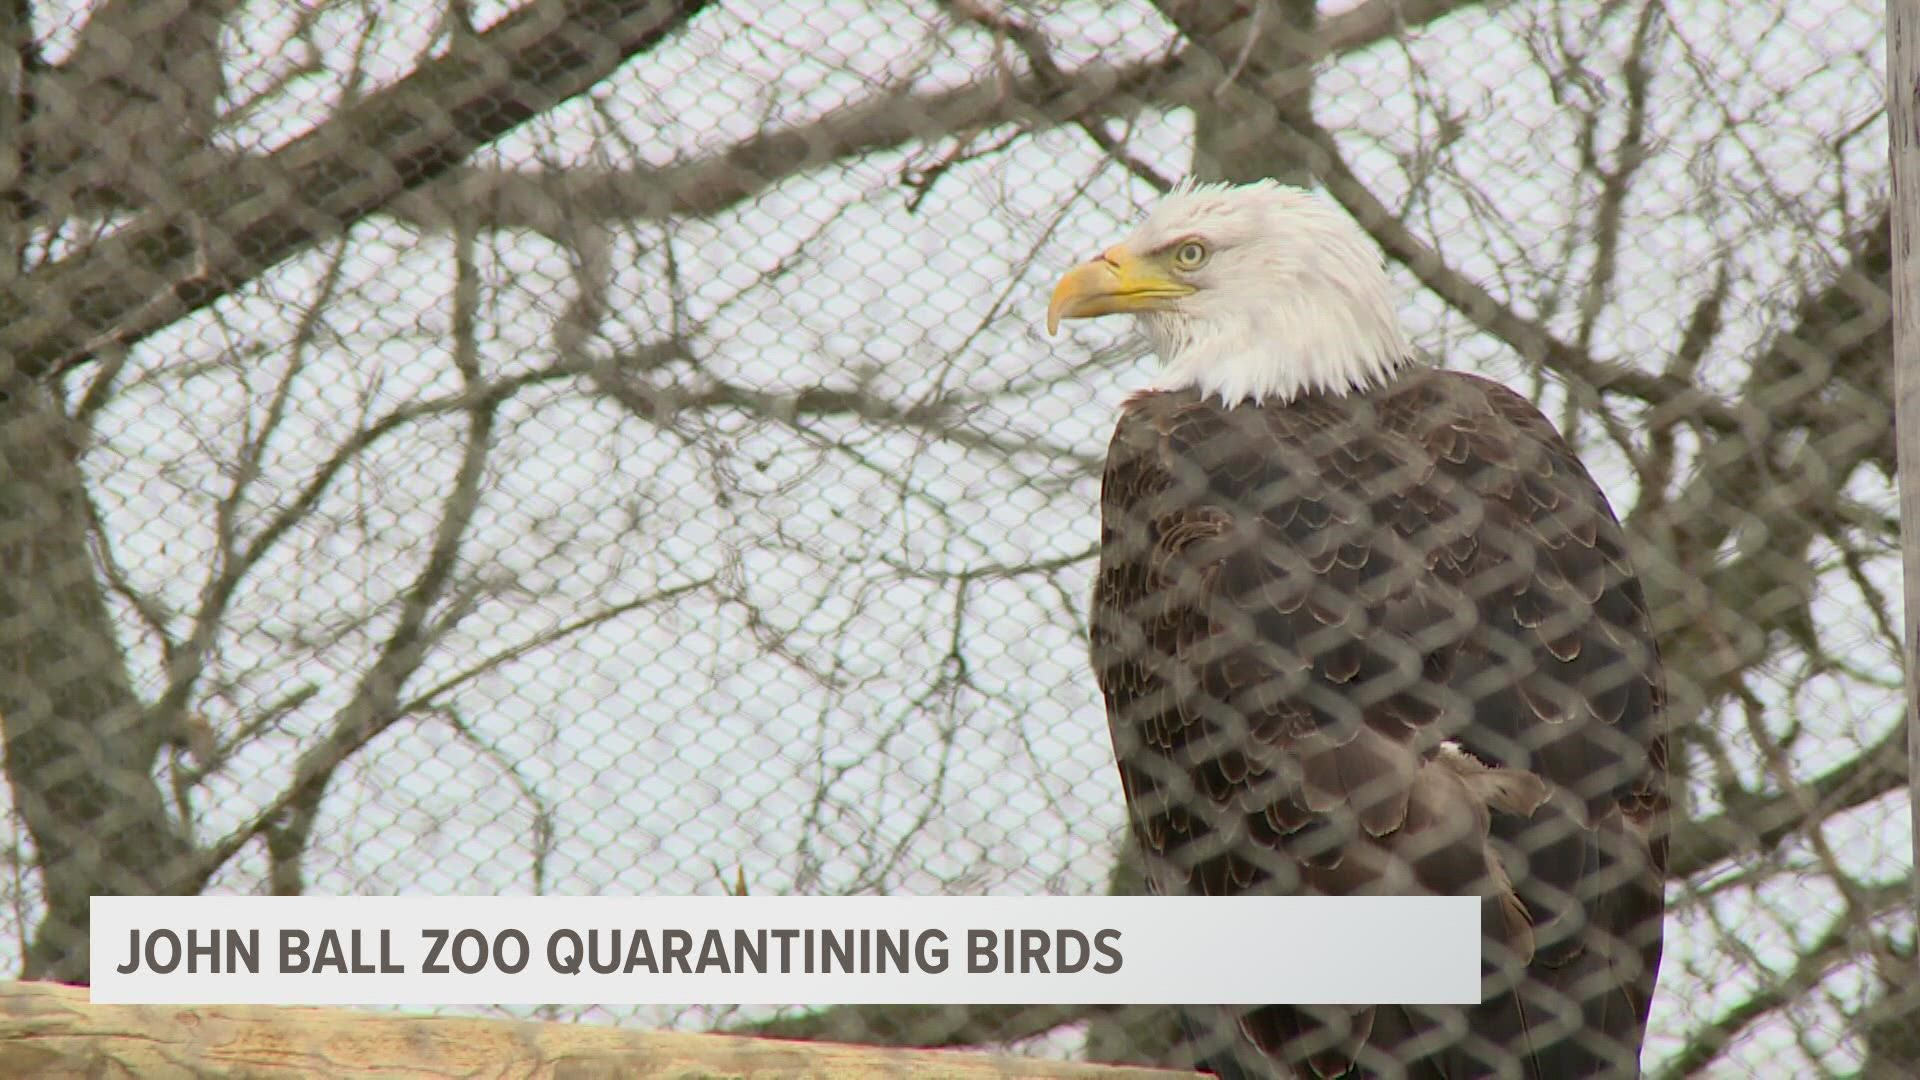 The Zoo's veterinarian is hopeful the delay won't last too long and birds will return to their outdoor exhibits soon.